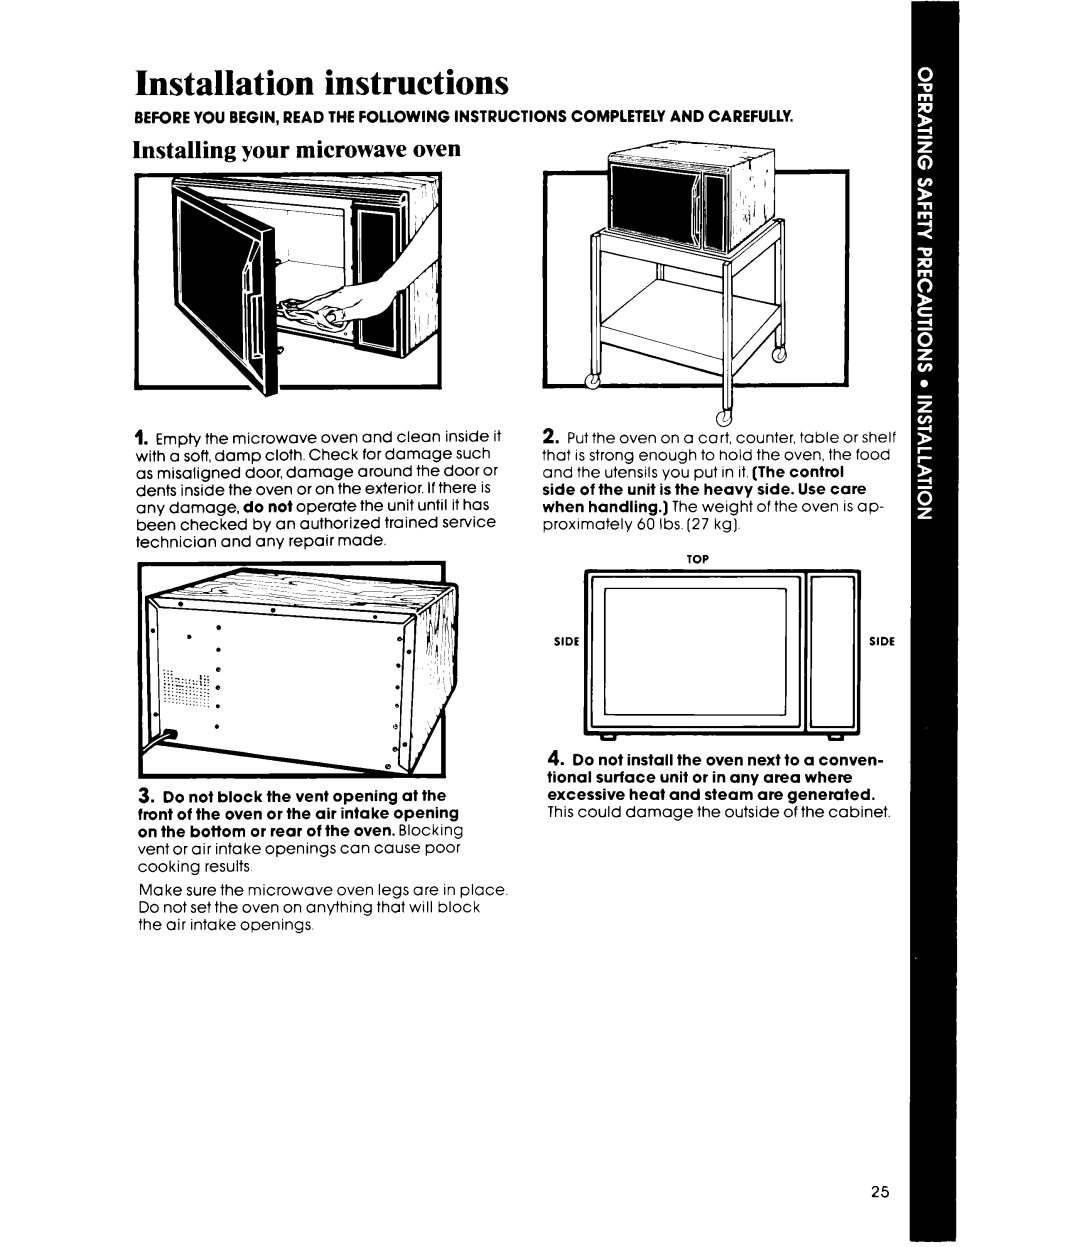 Whirlpool MW8700XR manual Installation instructions, Installing your microwave oven 